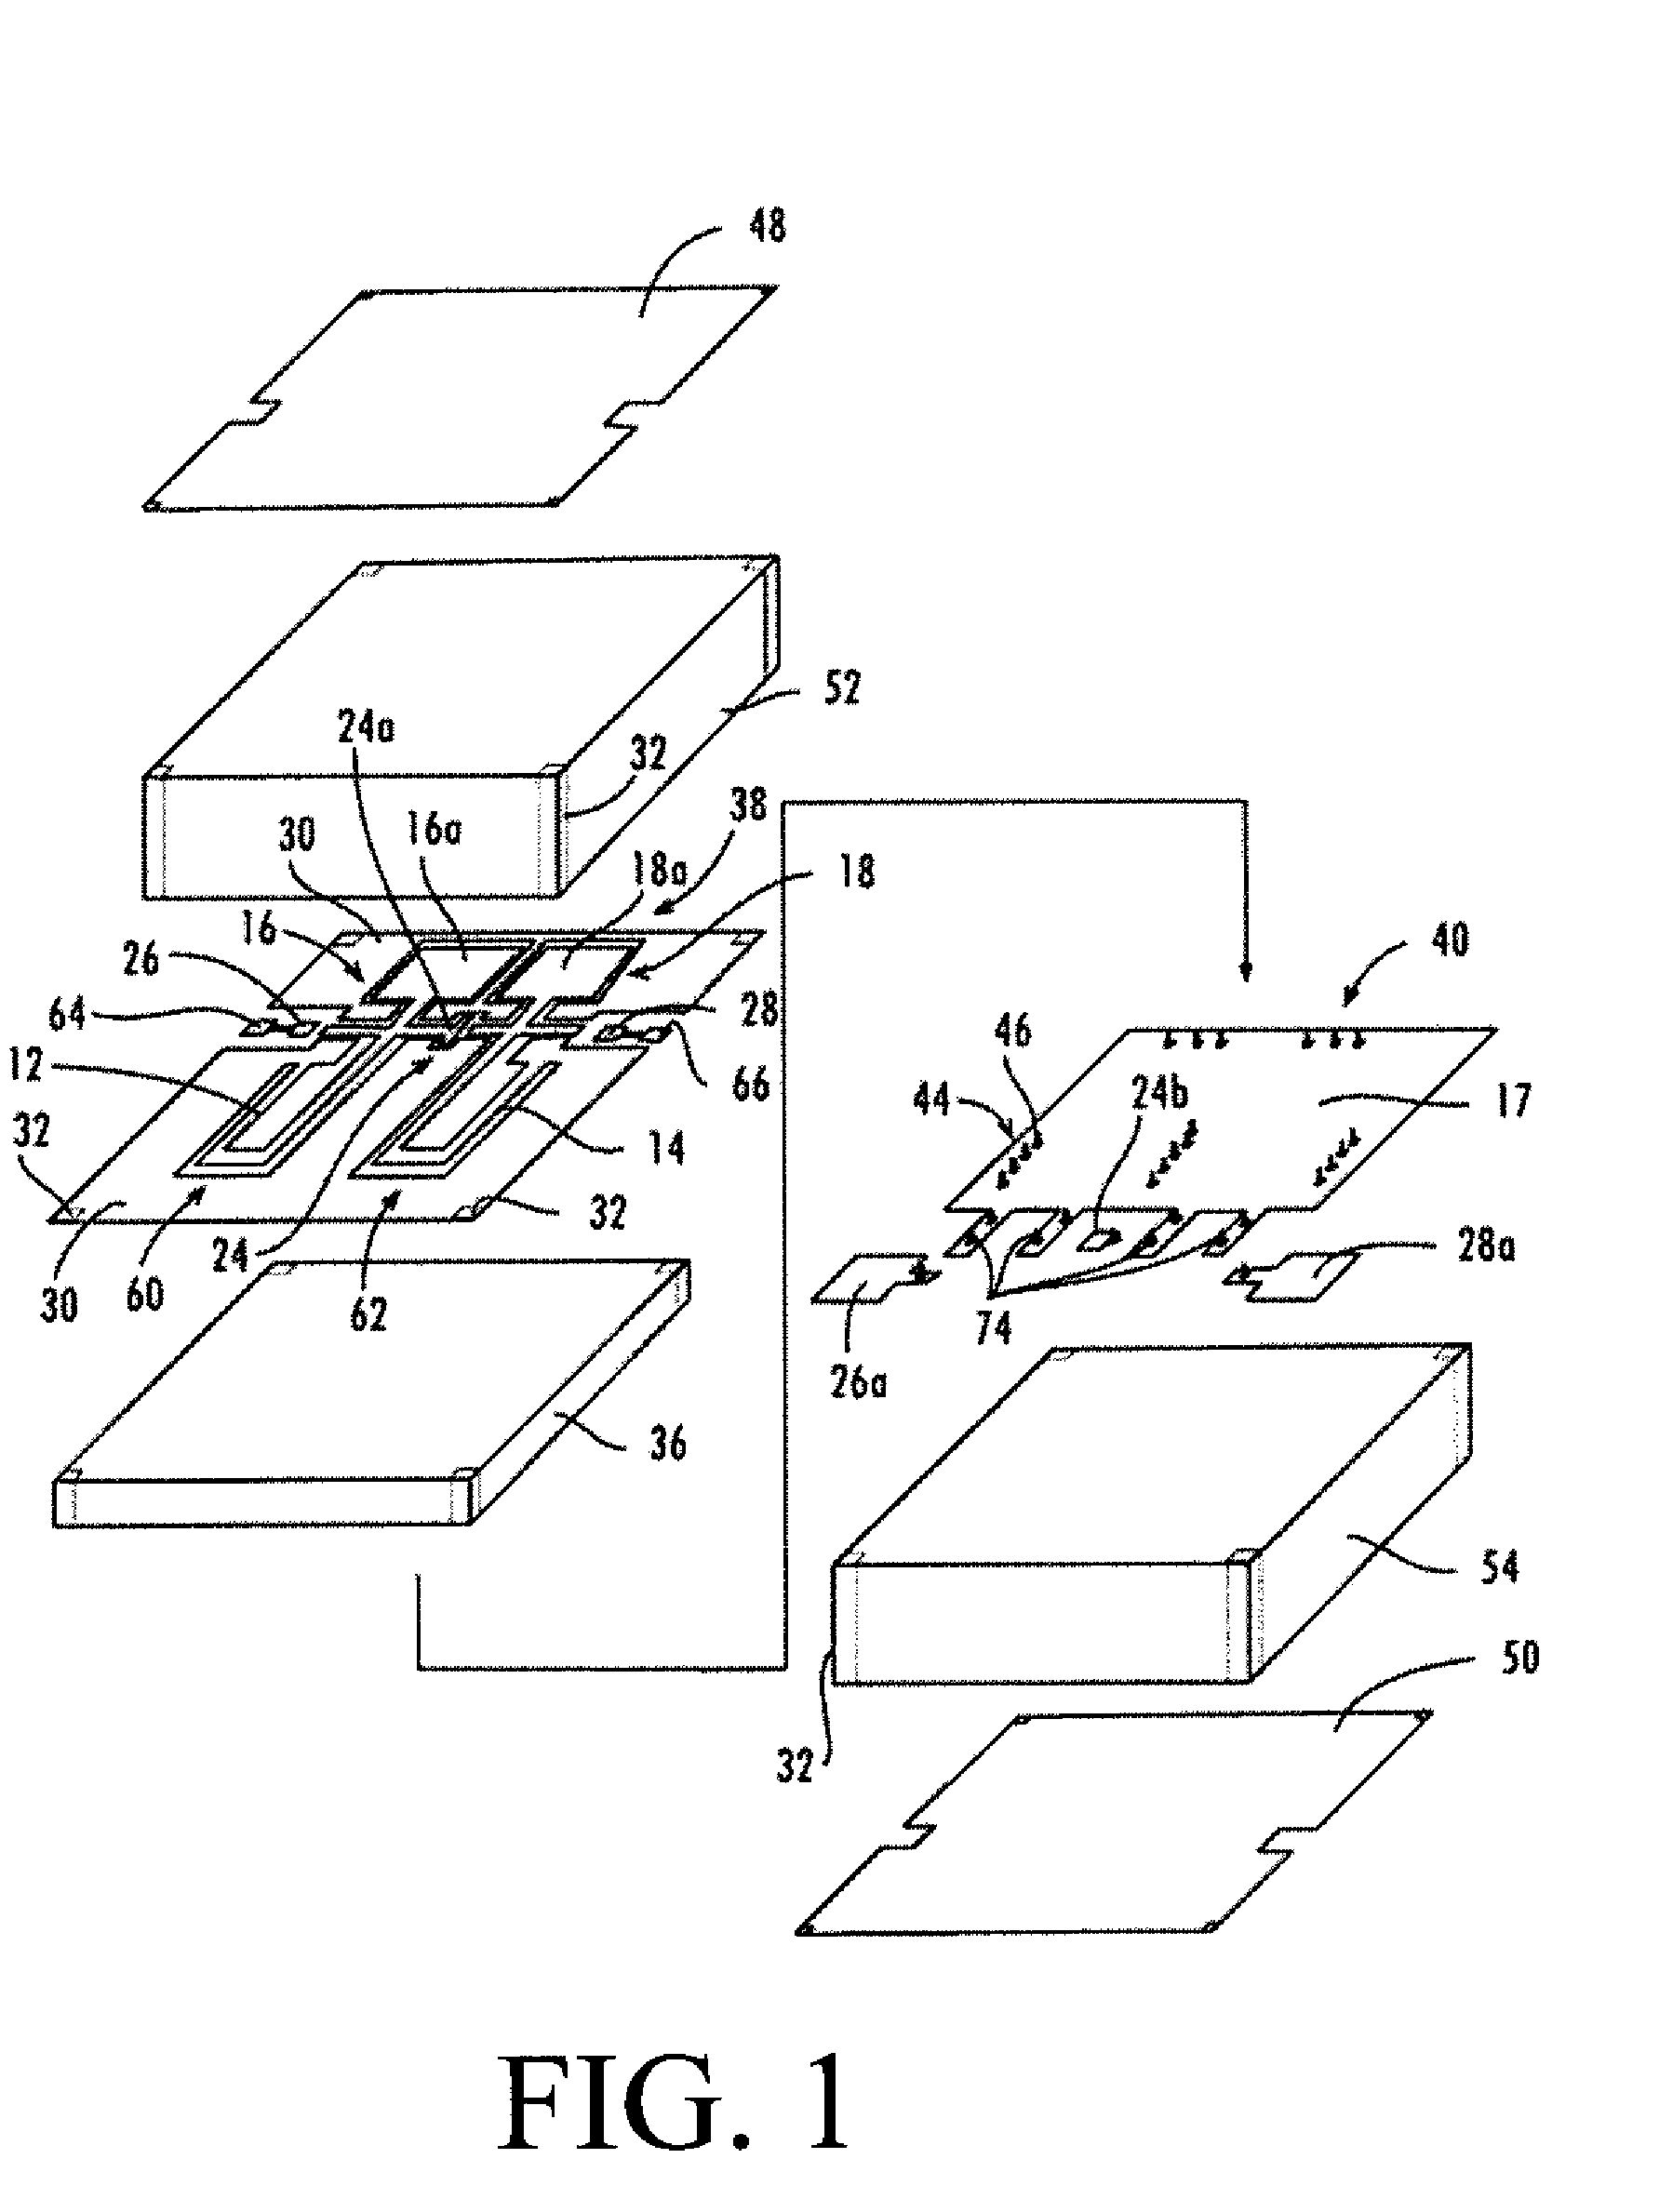 Systems and Methods for Integrated Antennae Structures in Multilayer Organic-Based Printed Circuit Devices